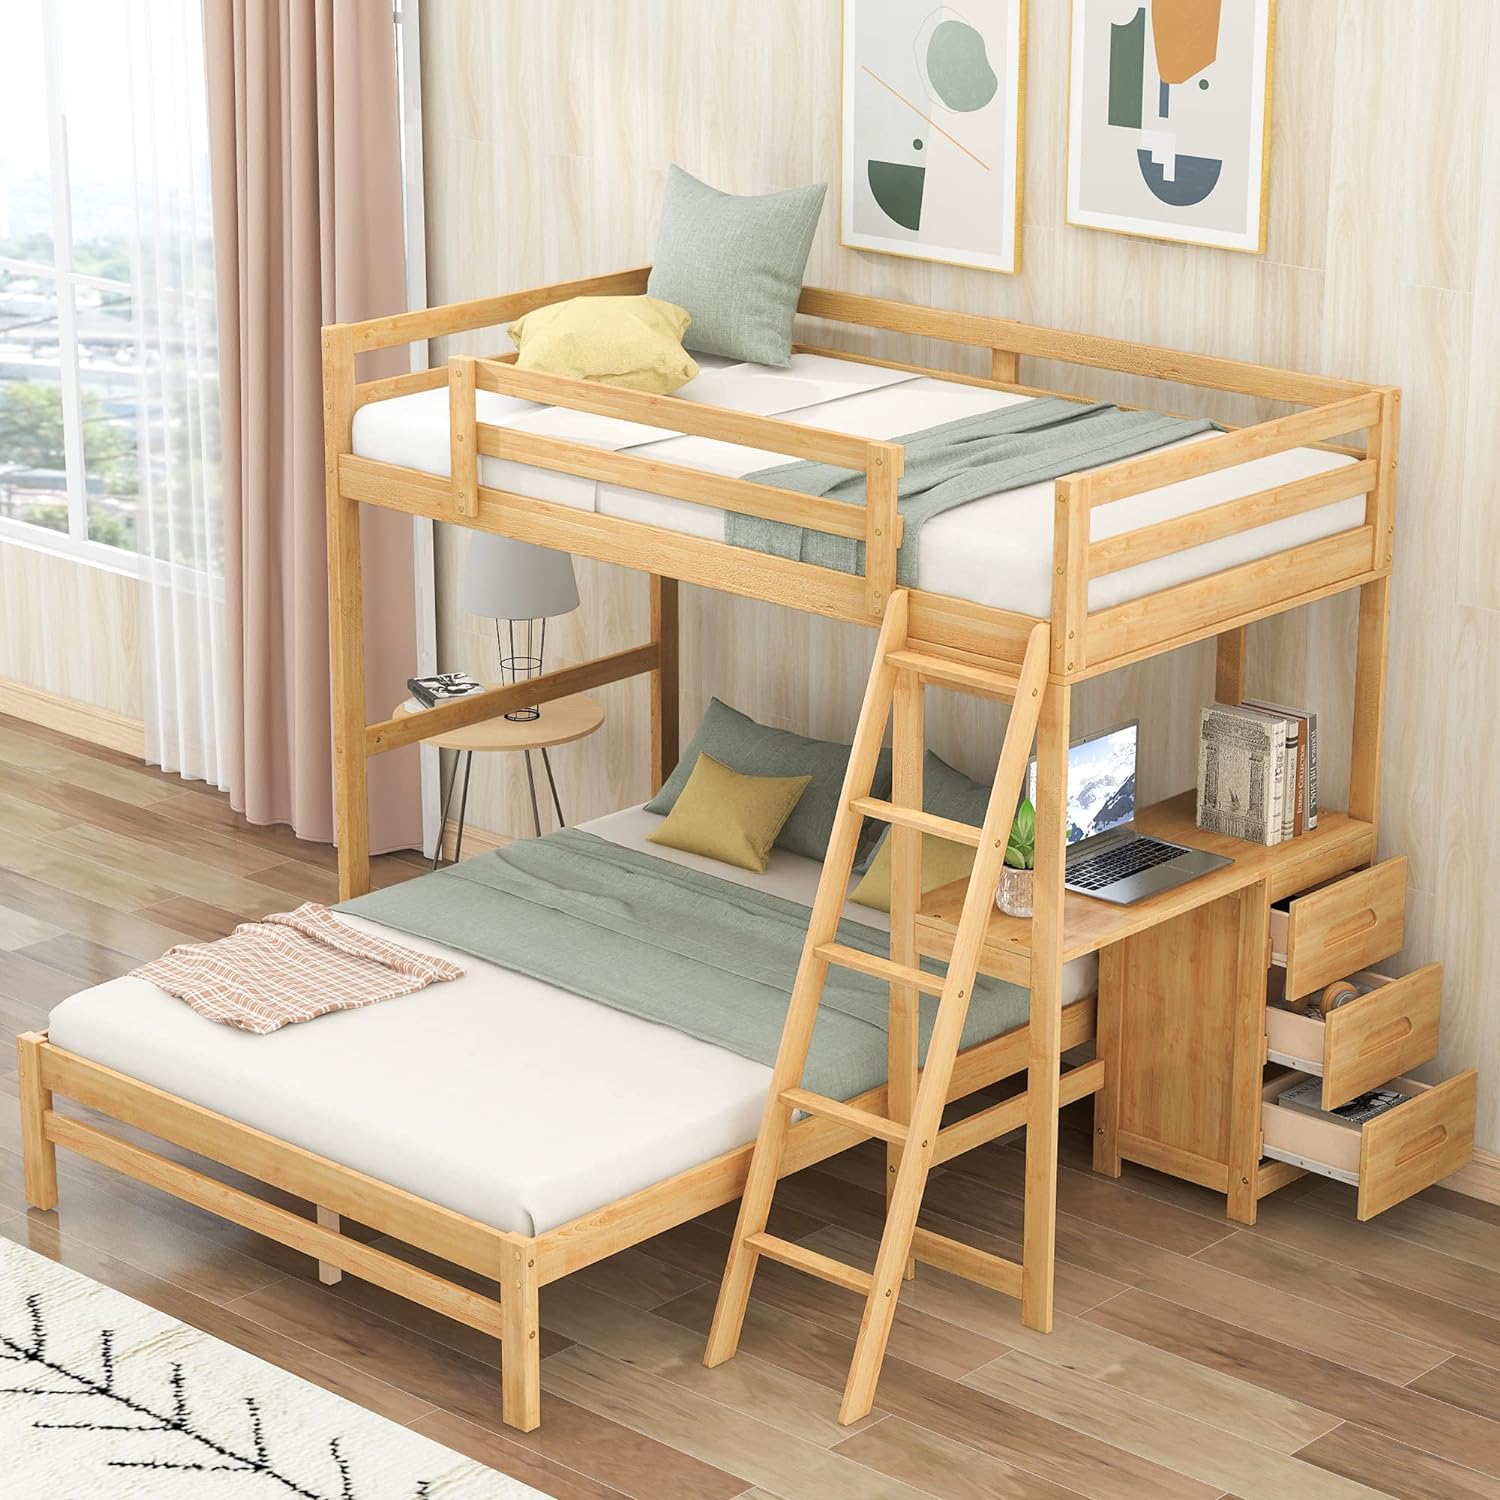 YuiHome Bunk Bed with Built